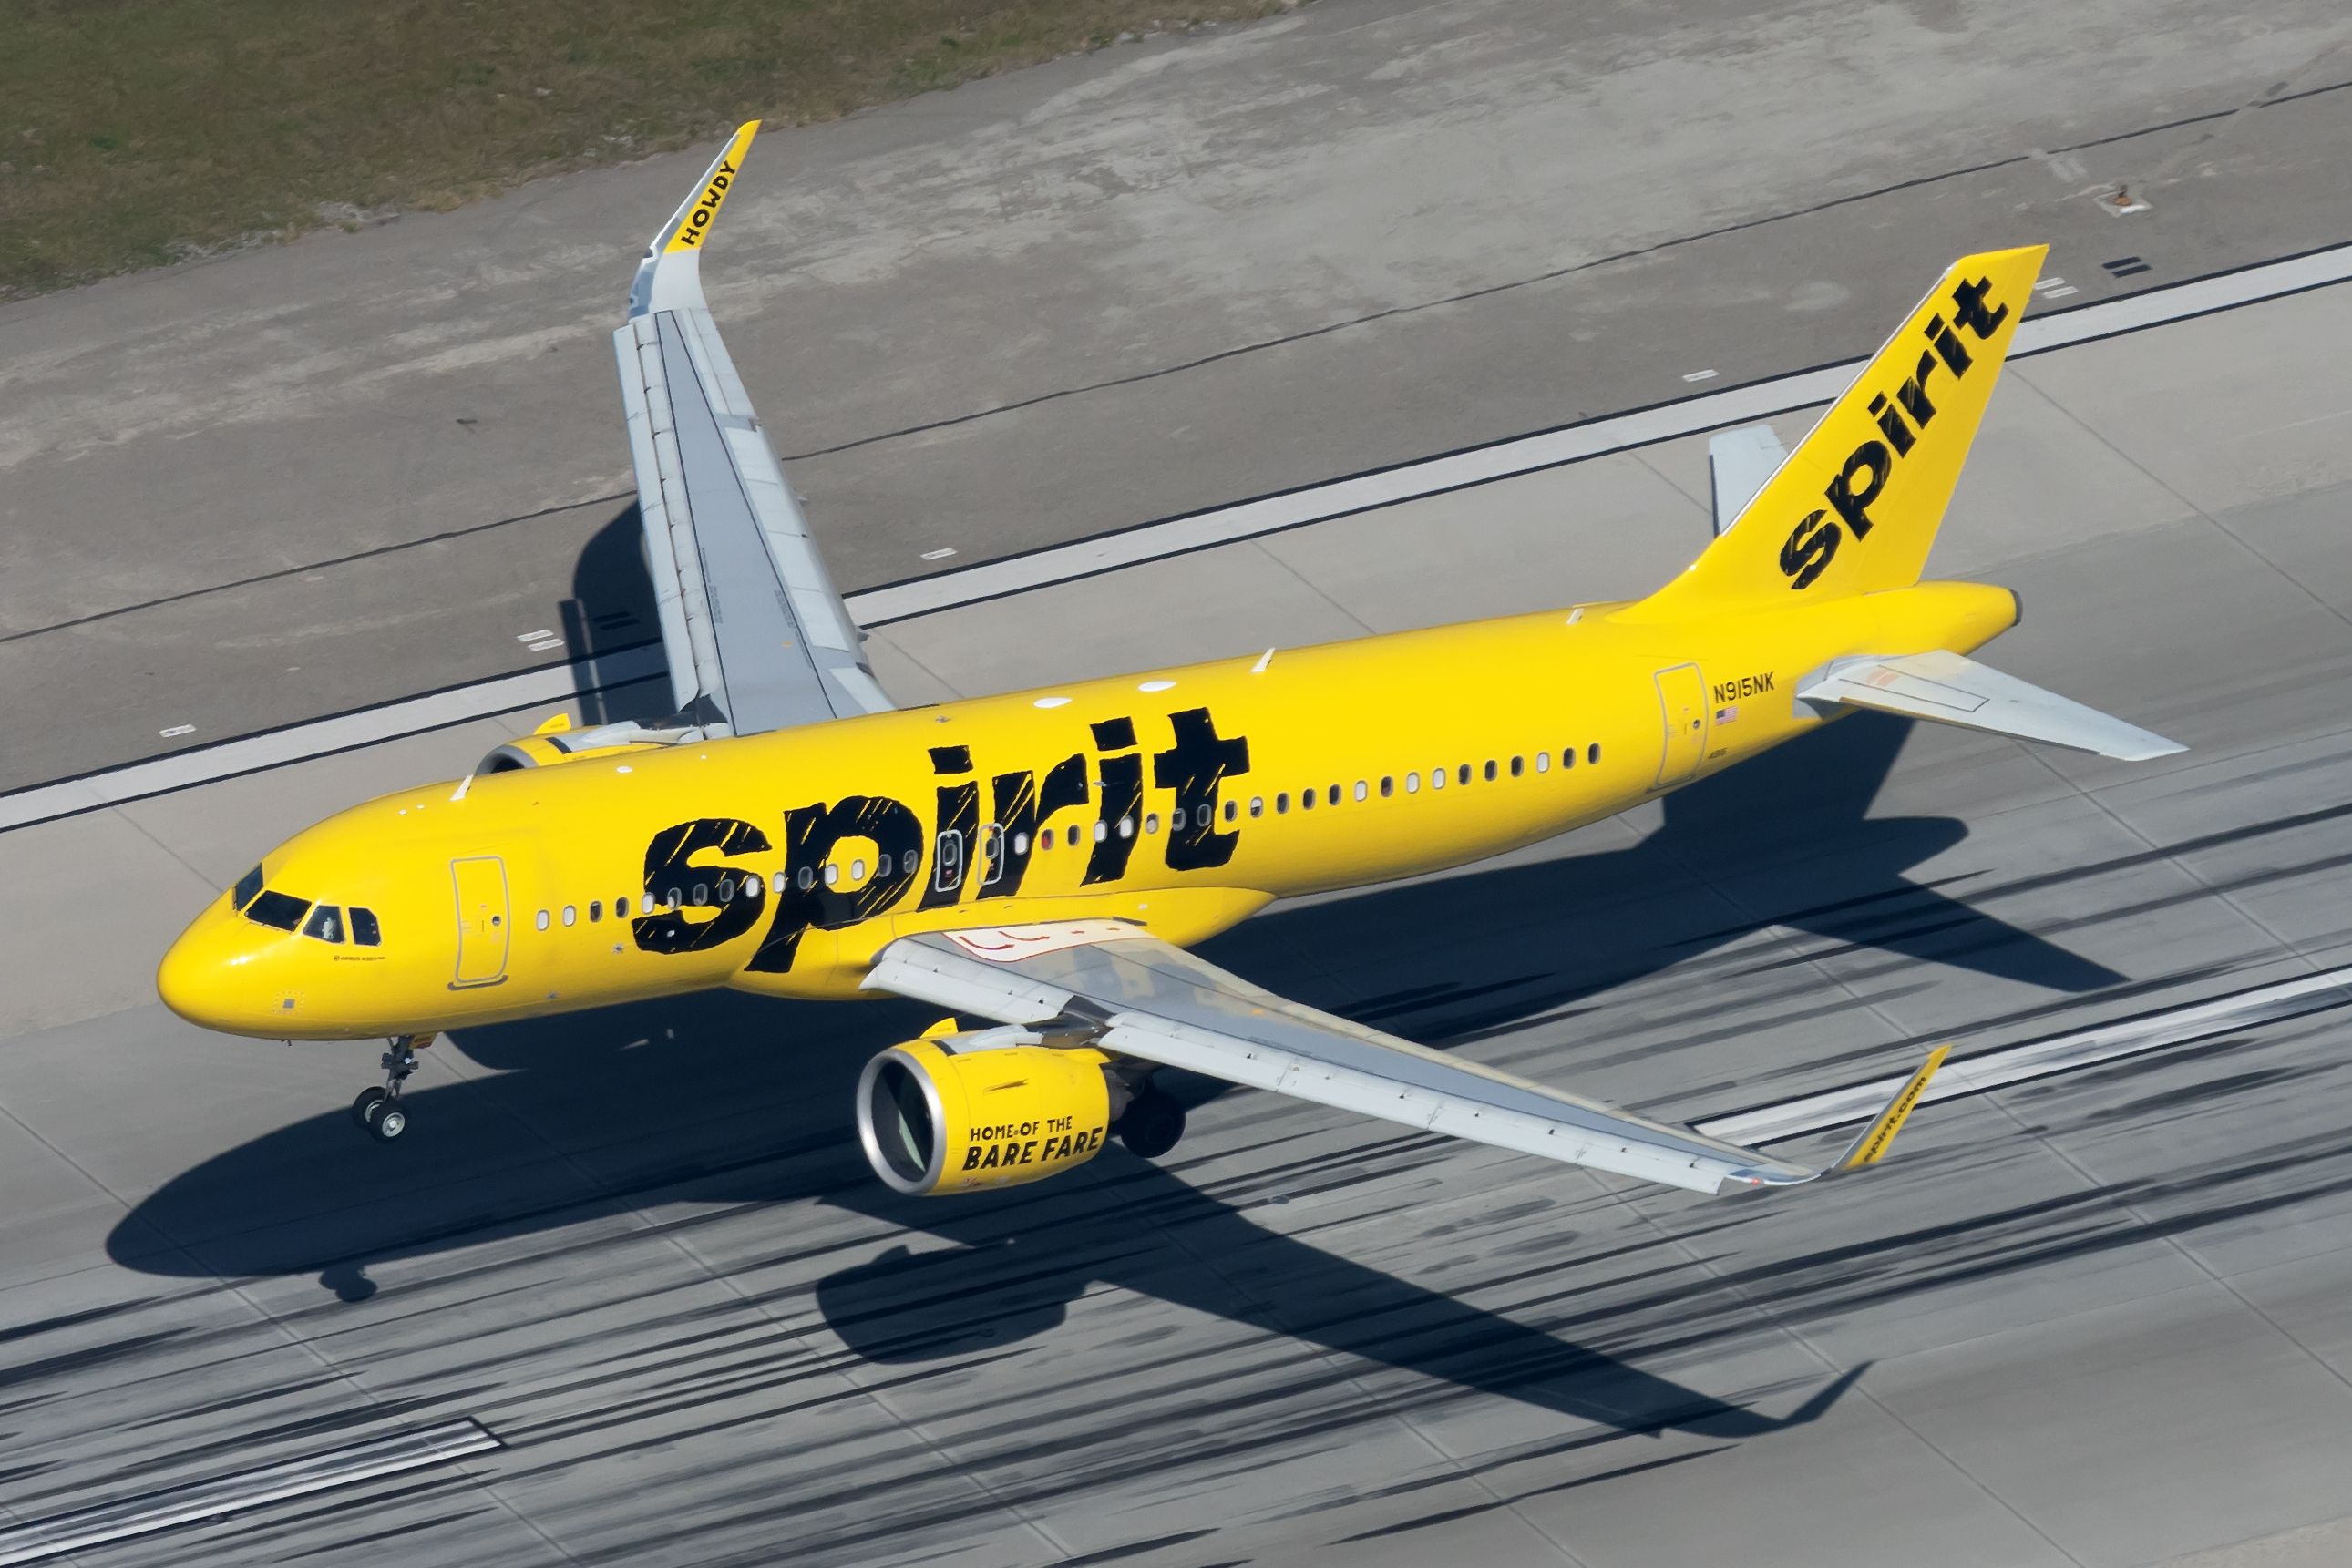 A Spirit Airlines Airbus A320 just before taking off.